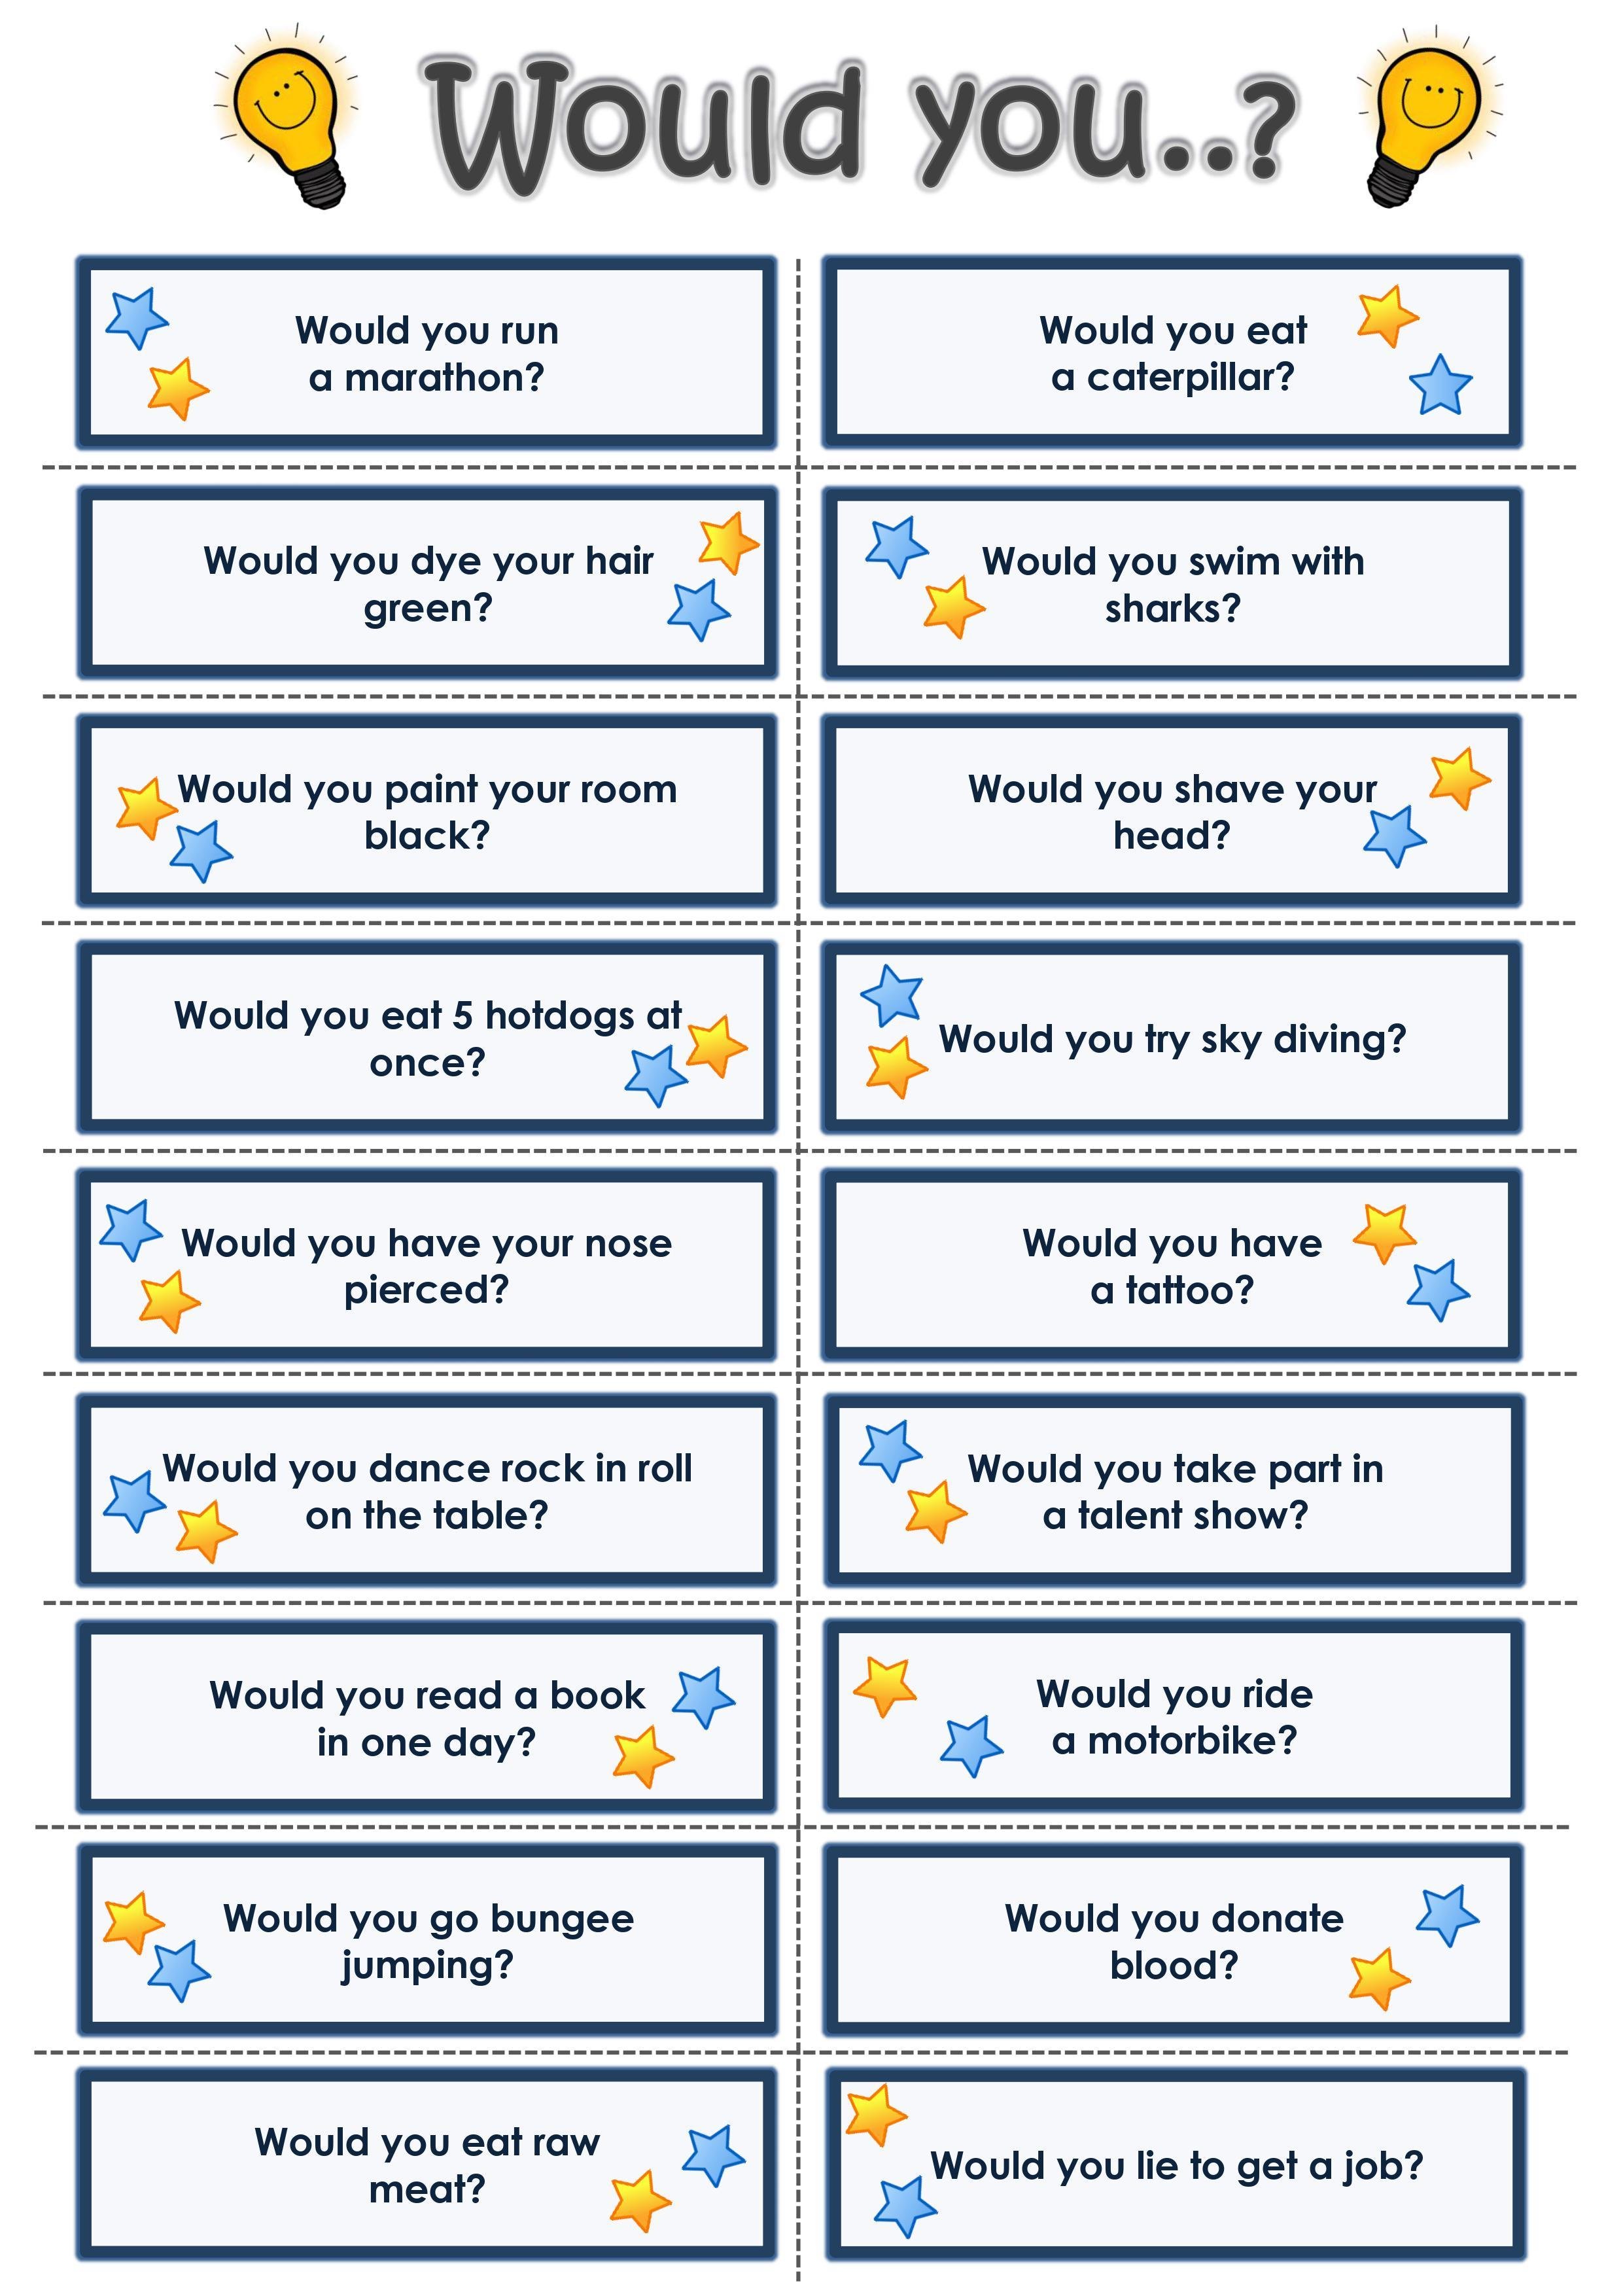 grammar-corner-would-you-questions-for-esl-students